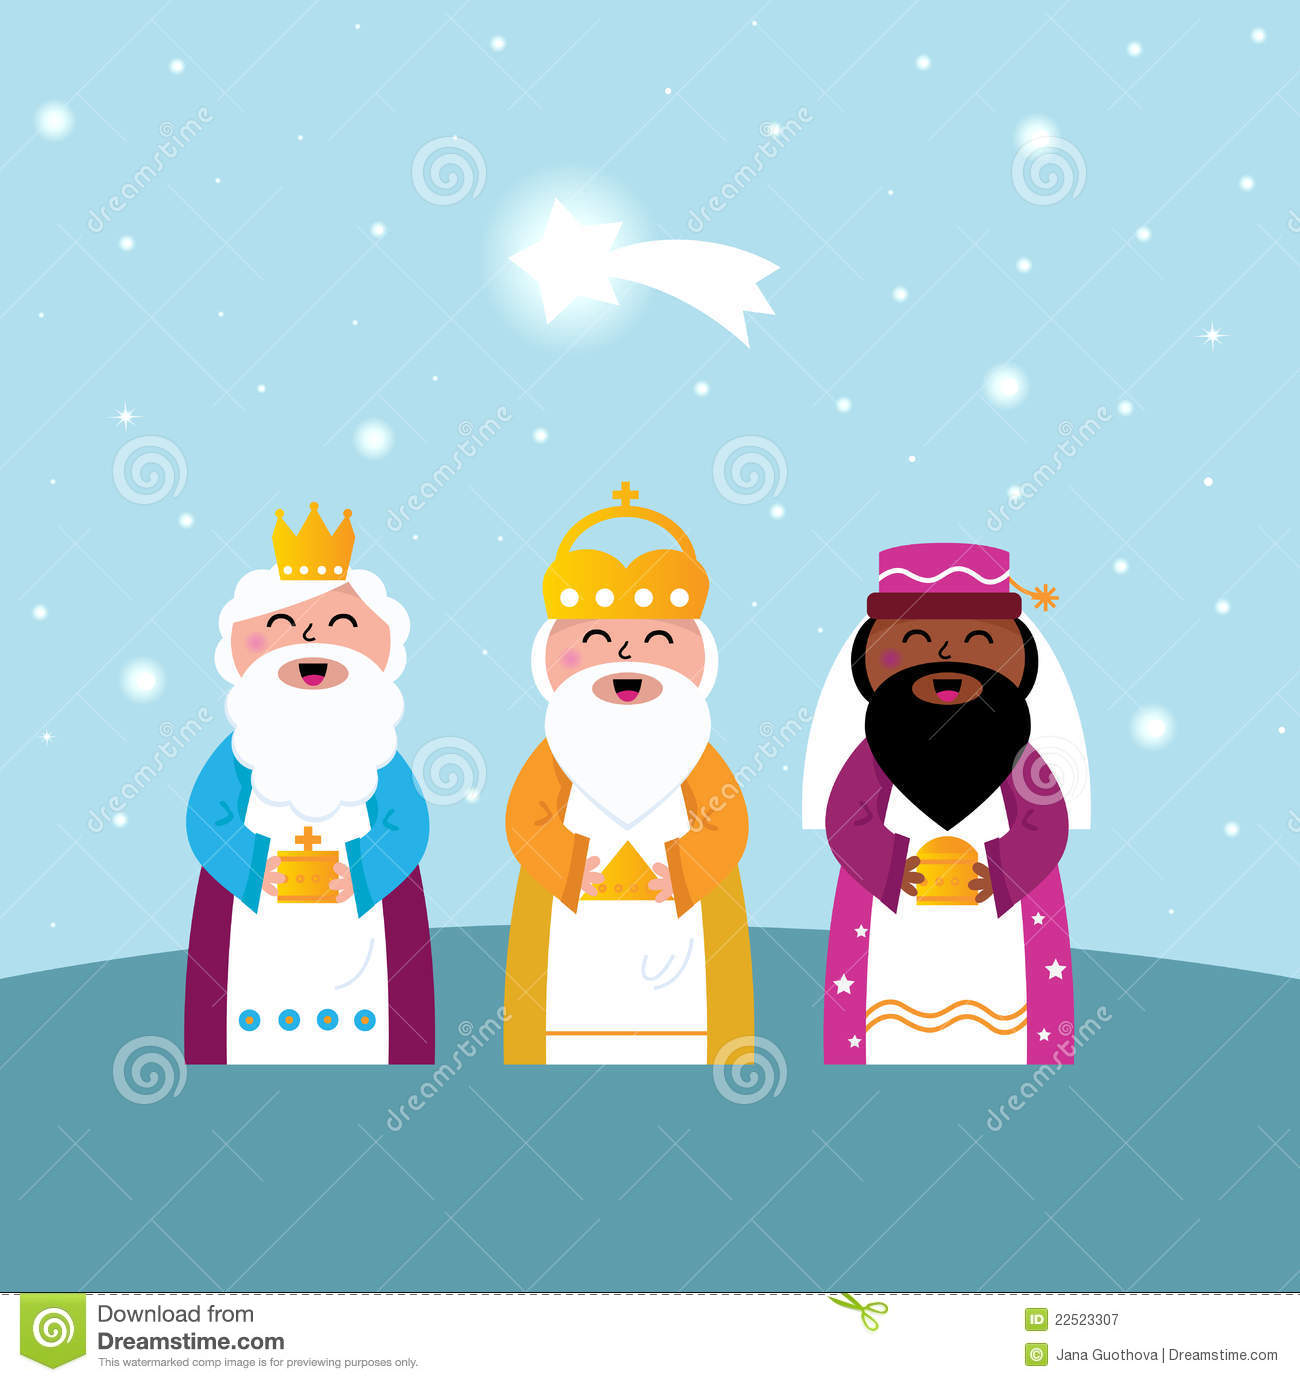 Three Wise Men Bringing Gifts Royalty Free Stock Photography   Image